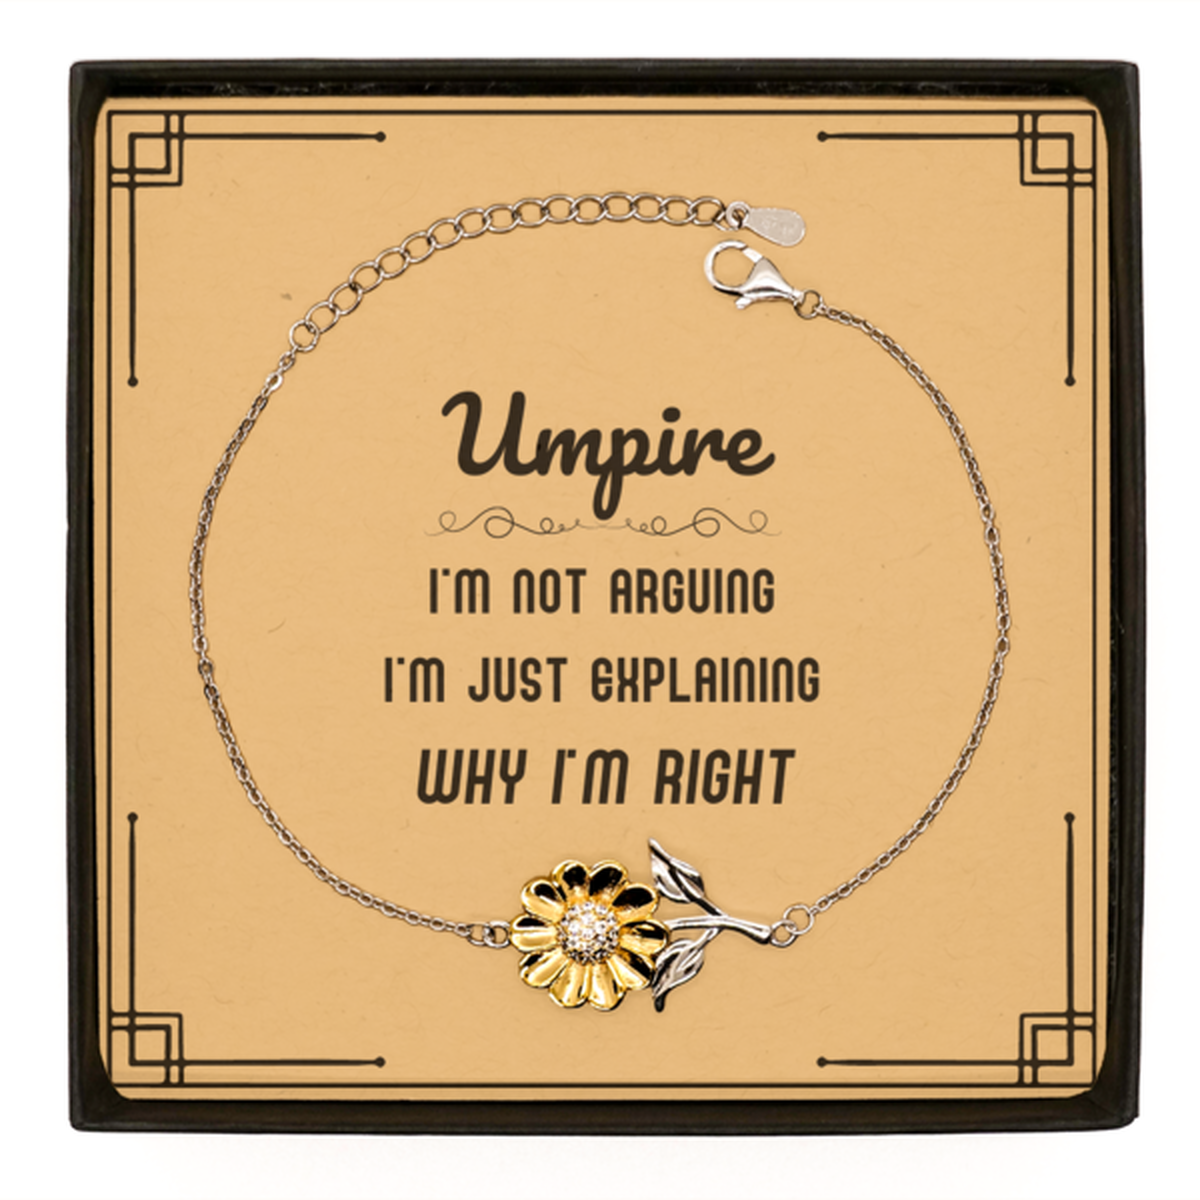 Umpire I'm not Arguing. I'm Just Explaining Why I'm RIGHT Sunflower Bracelet, Funny Saying Quote Umpire Gifts For Umpire Message Card Graduation Birthday Christmas Gifts for Men Women Coworker